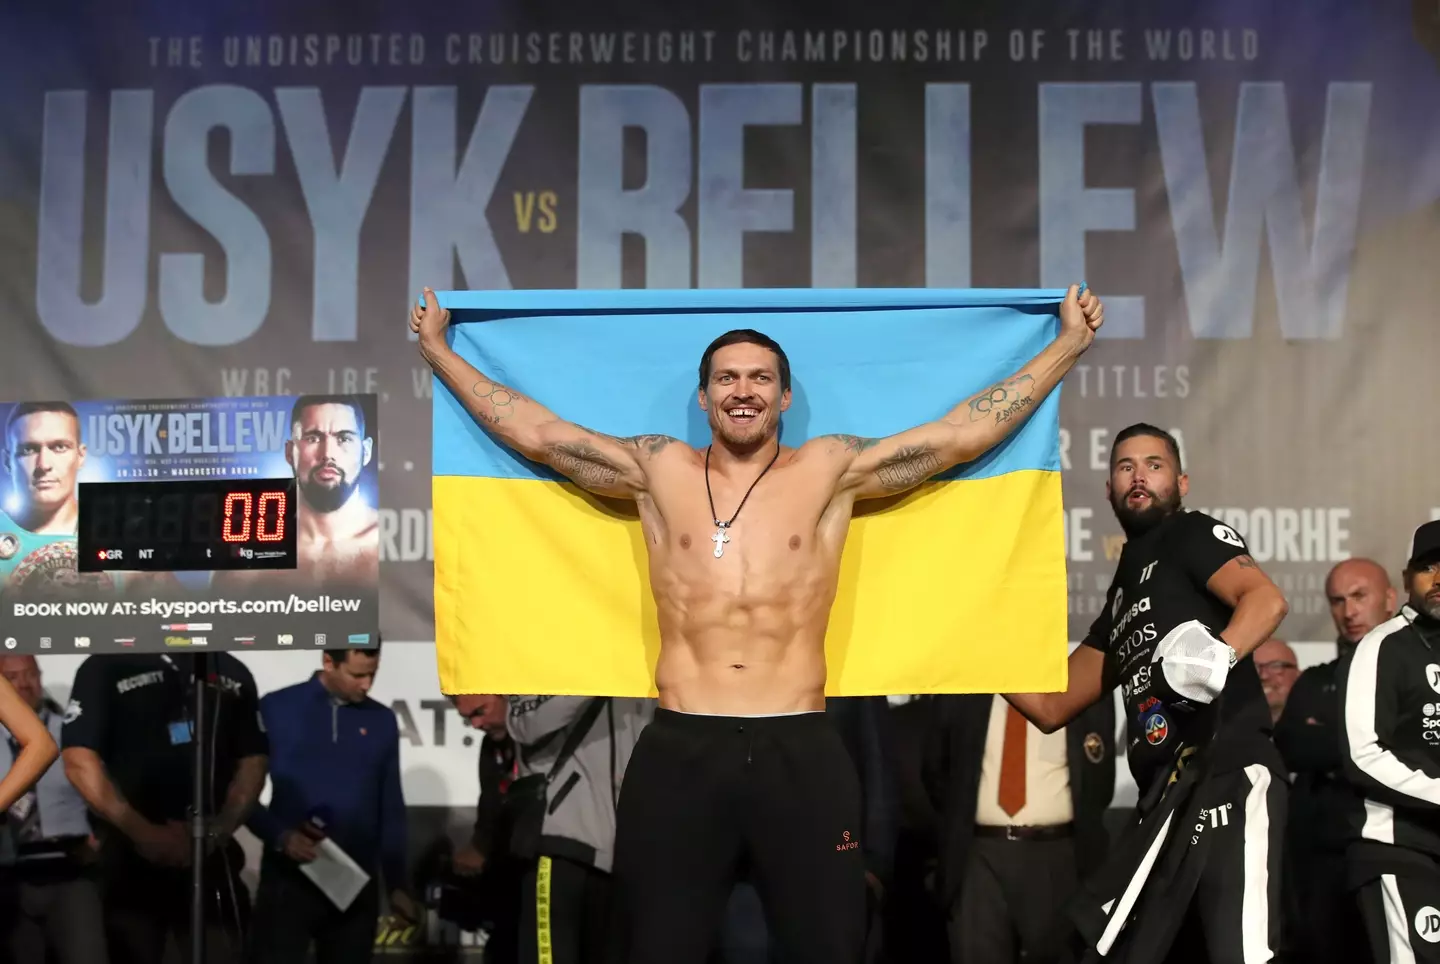 Usyk ahead of his fight against Bellew. Image: PA Images